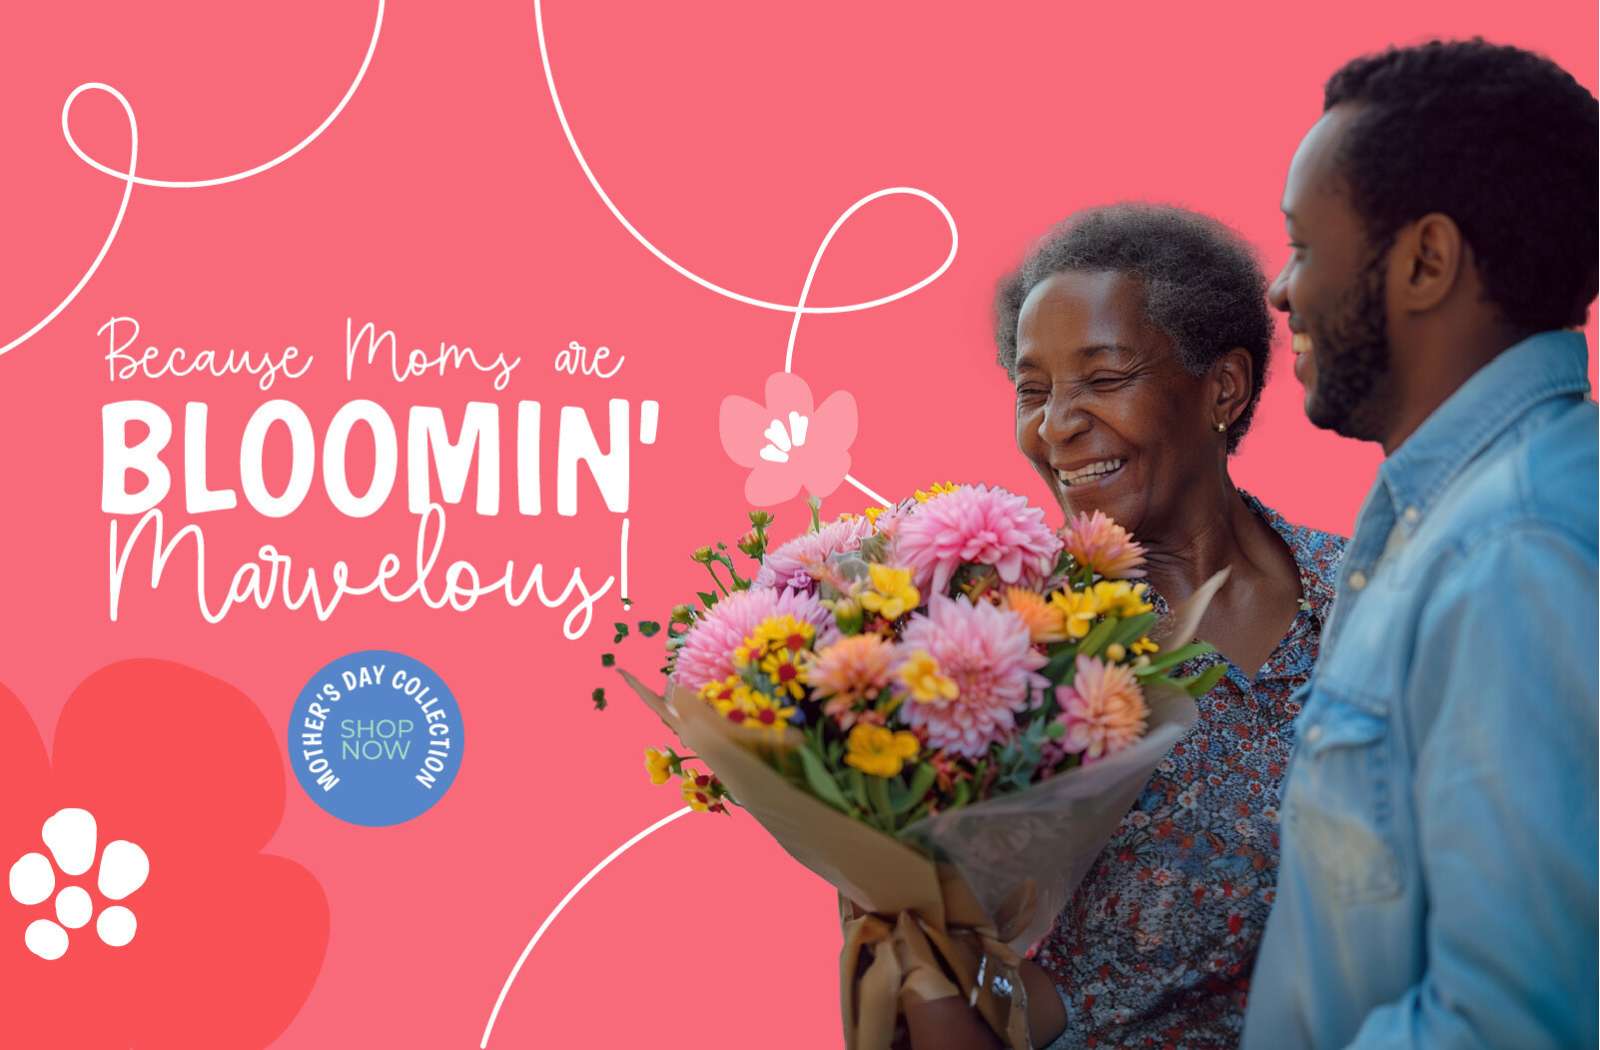 A heartwarming scene of an elderly woman with a radiant smile, receiving a vibrant bouquet of fresh pink and yellow chrysanthemums from a younger man, celebrating the Mother's Day Collection at Fabulous Flowers and Gifts.